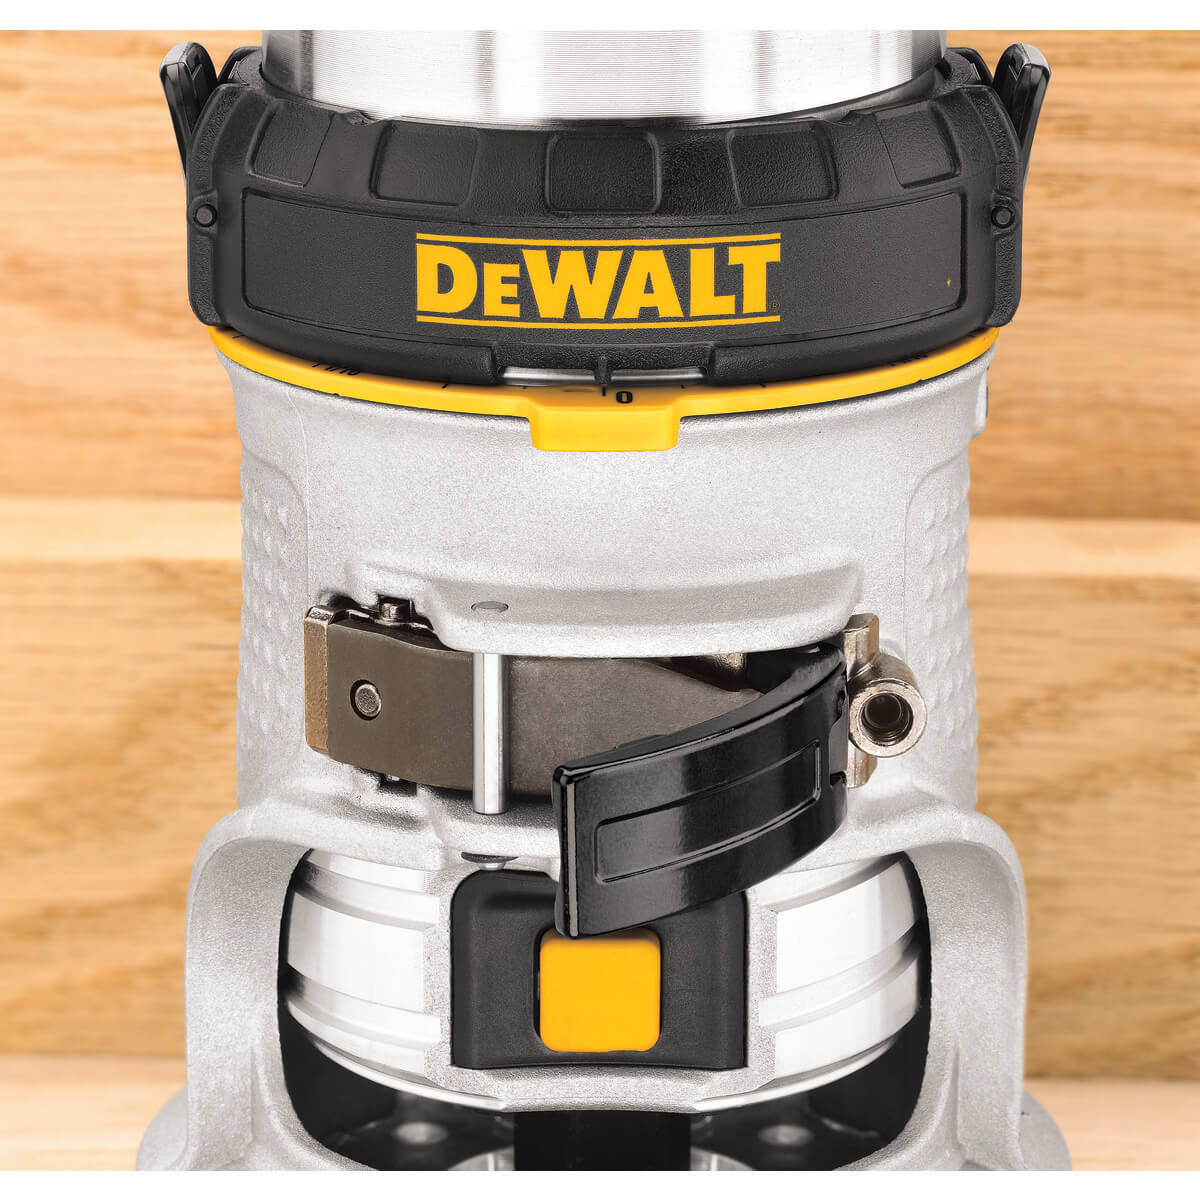 DEWALT DWP611 - 1-1/4 HP Premium Fixed Base Compact Router - wise-line-tools